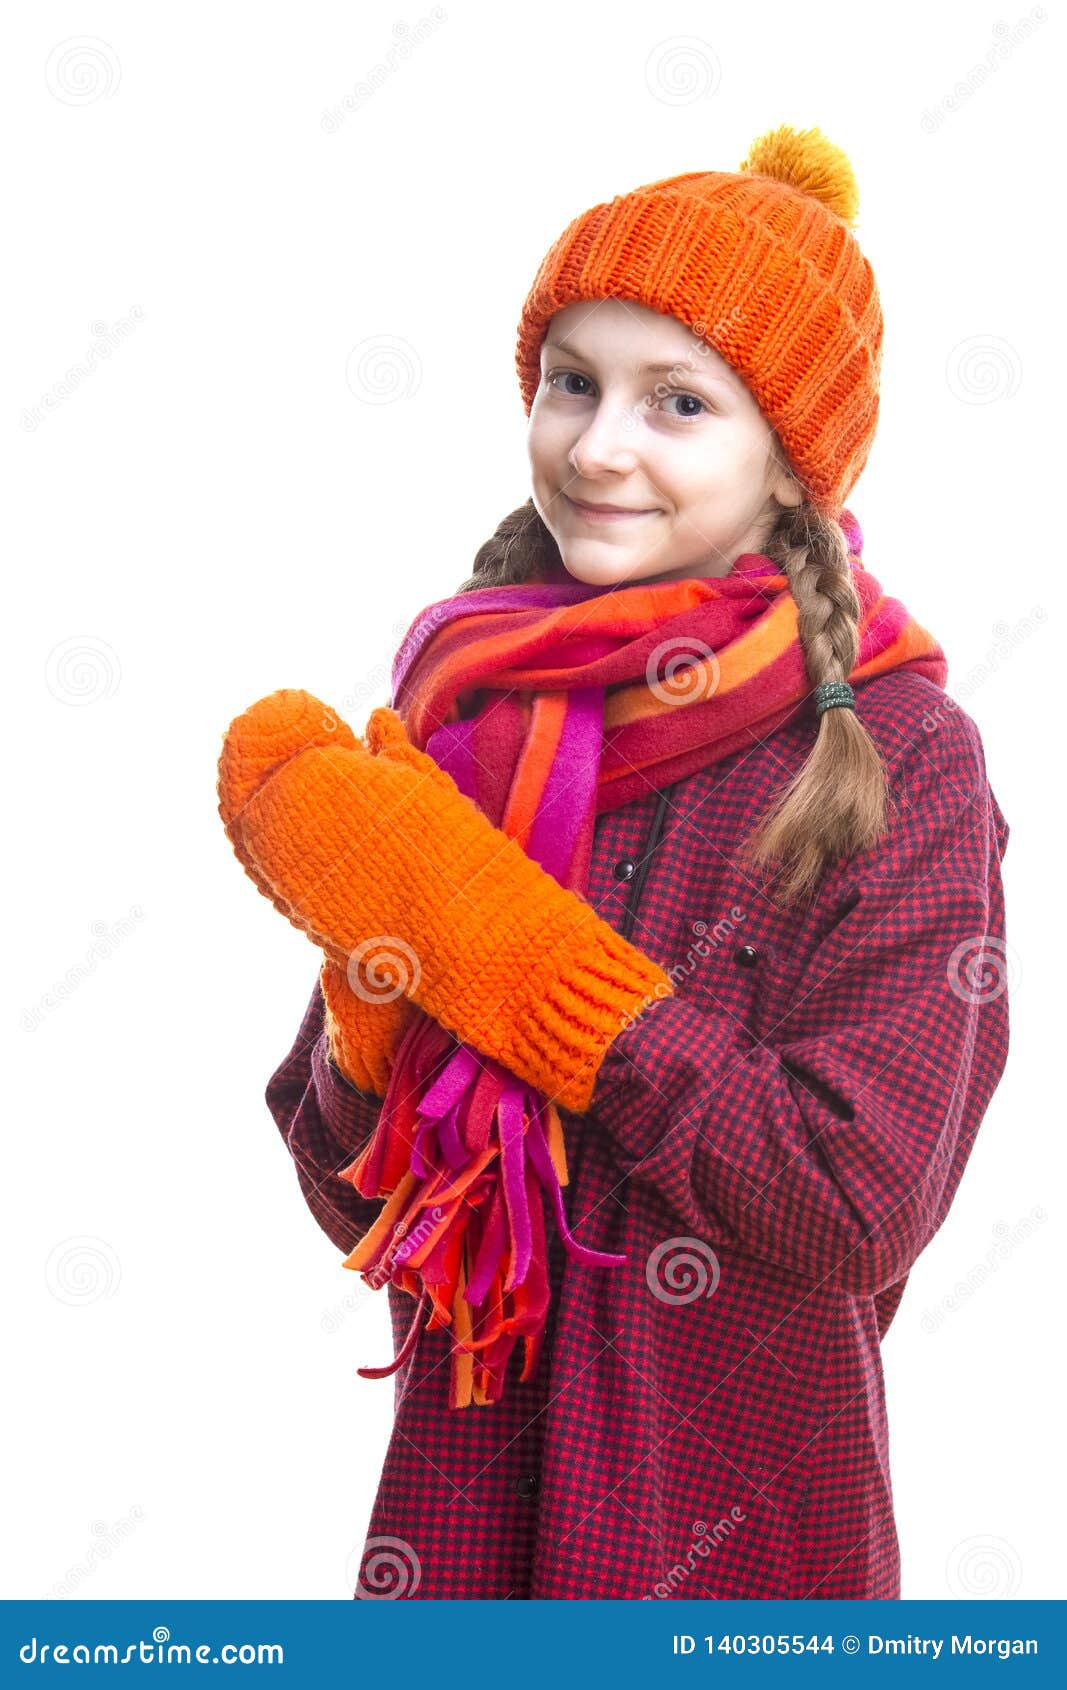 Kids Winter Clothing and Holidays Ideas. Smiling Caucasian Little Girl ...